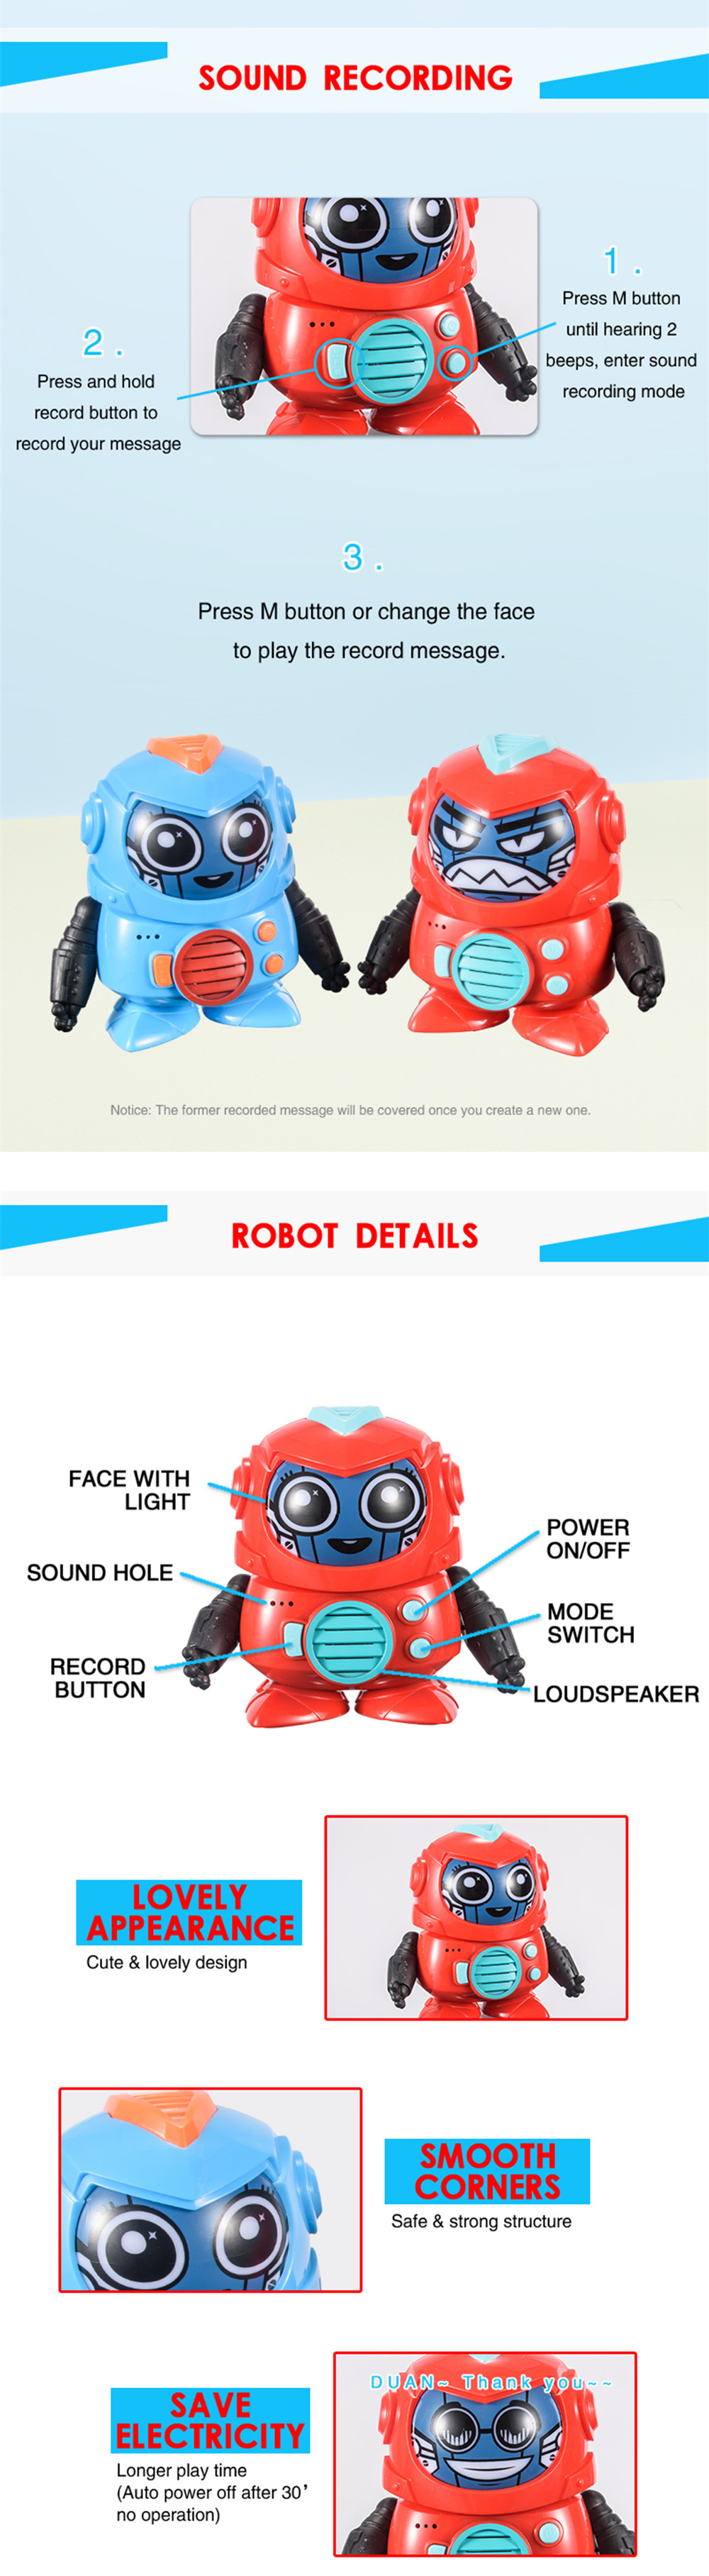 MOFUN-1902-Face-Changing-Voice-Record-Tone-Change-Interact-RC-Robot-Toy-1647981-2